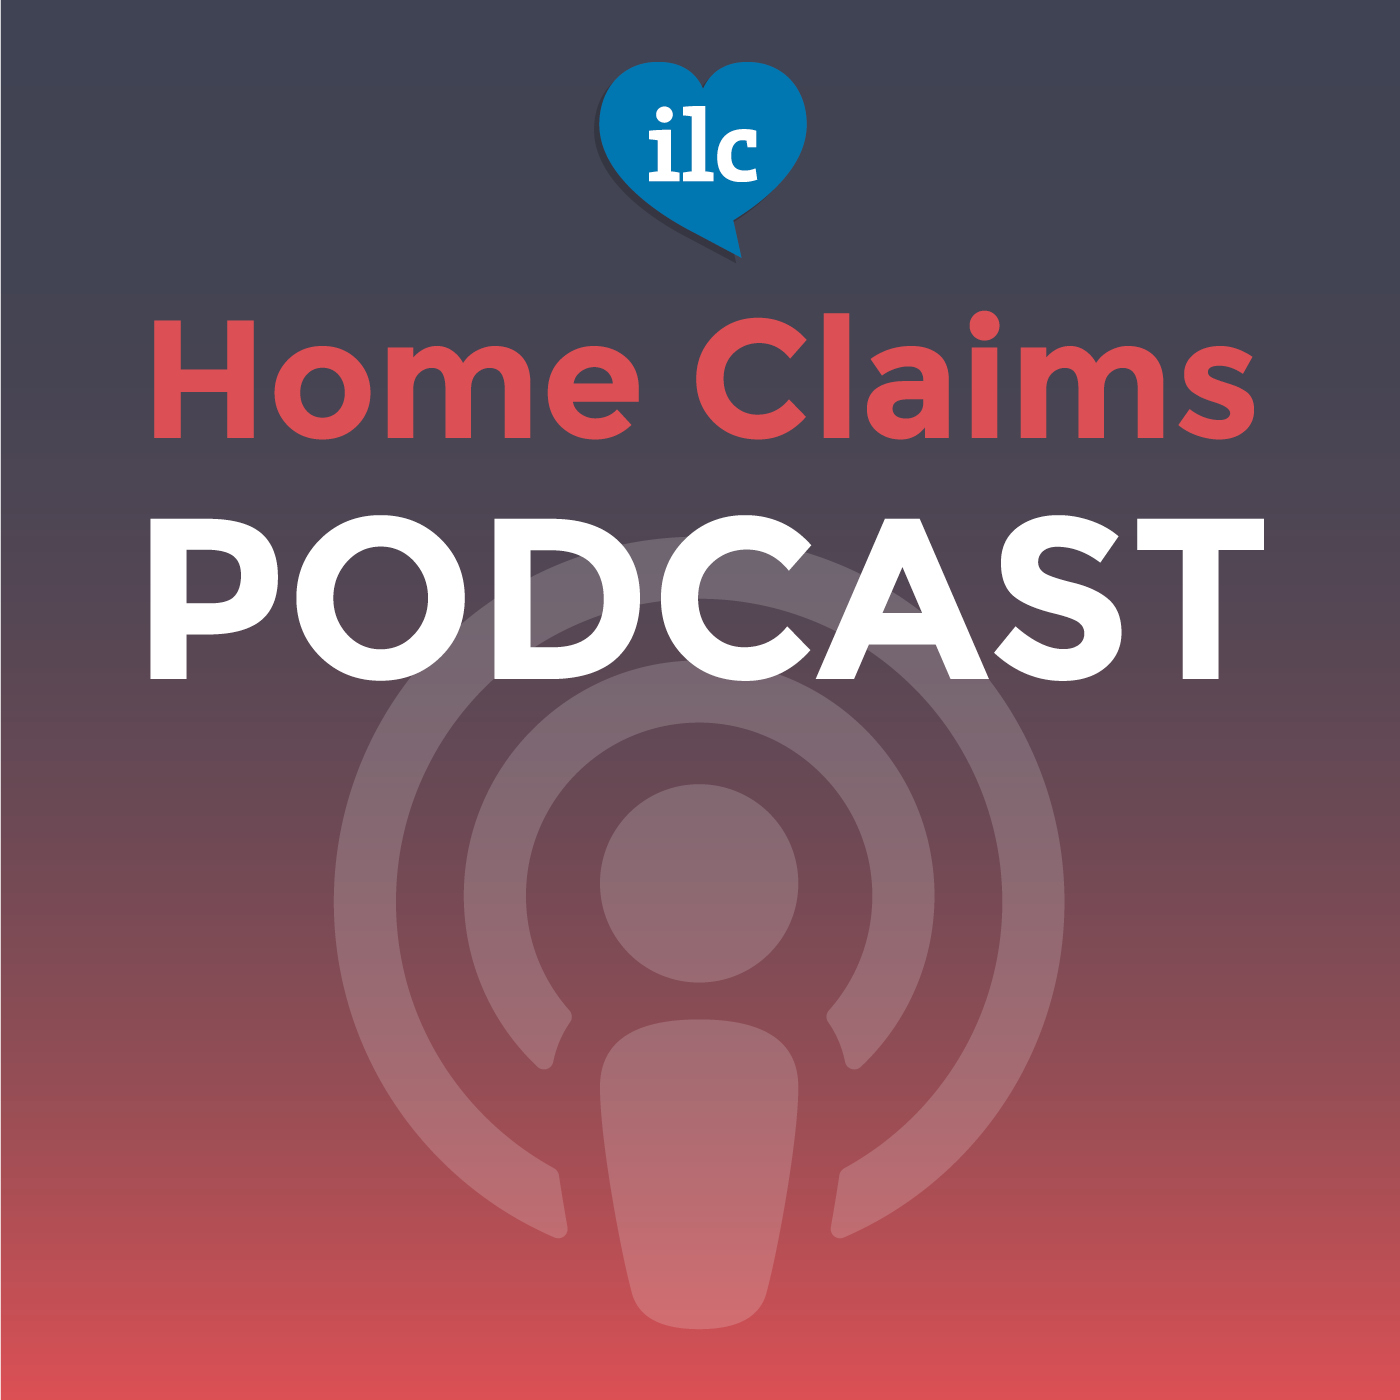 ILC Home Claims Podcast